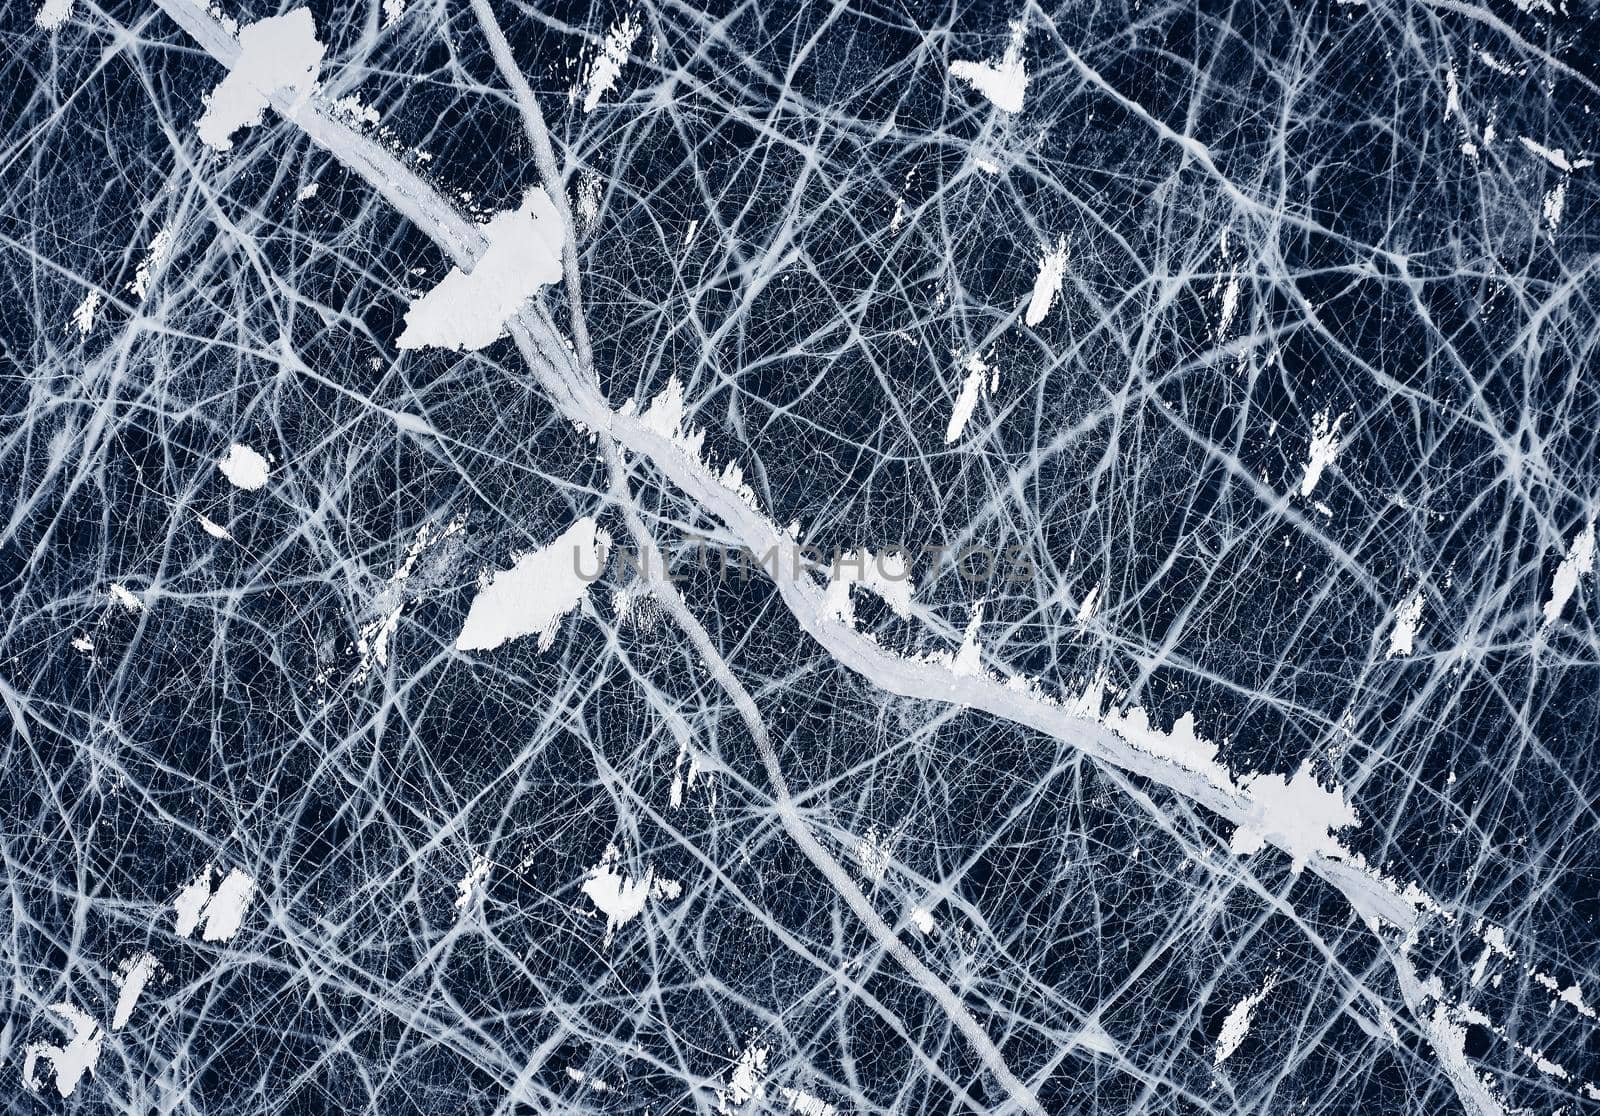 Deep blue ice - aerial view. Aesthetics of cracked ice. Frozen lake, texture of the ice. View of beautiful drawings on ice, Baikal lake in winter